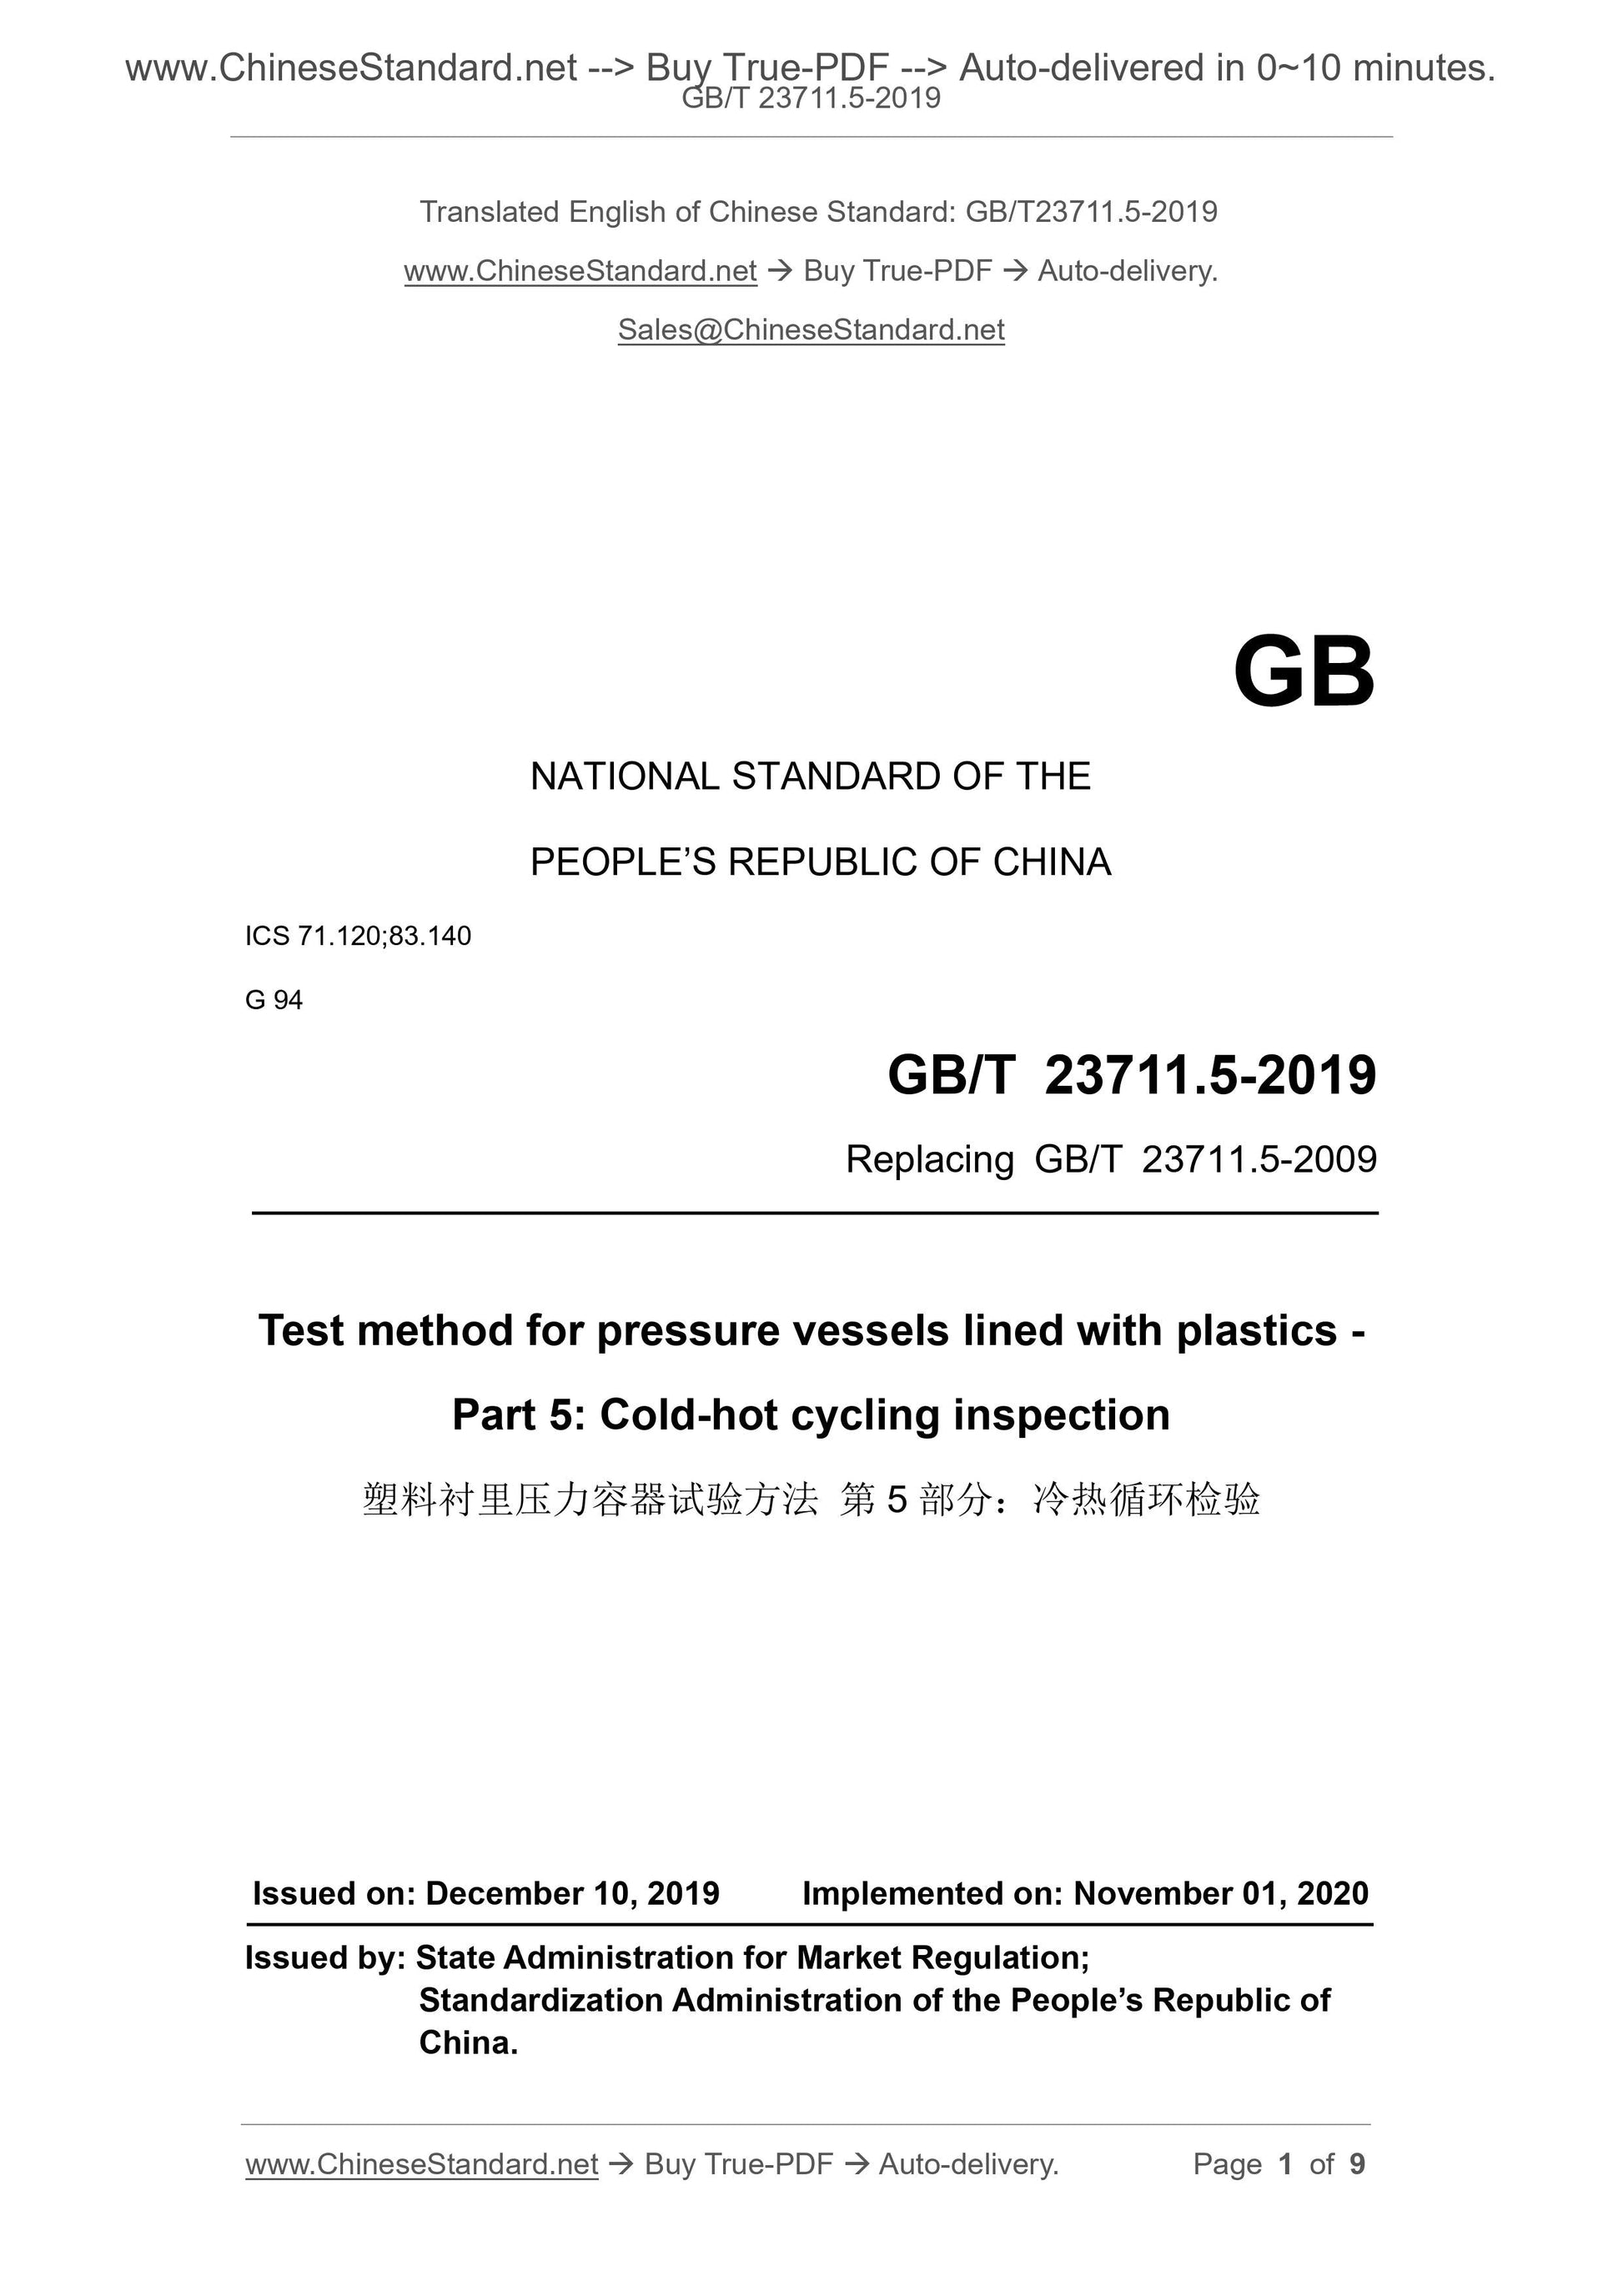 GB/T 23711.5-2019 Page 1